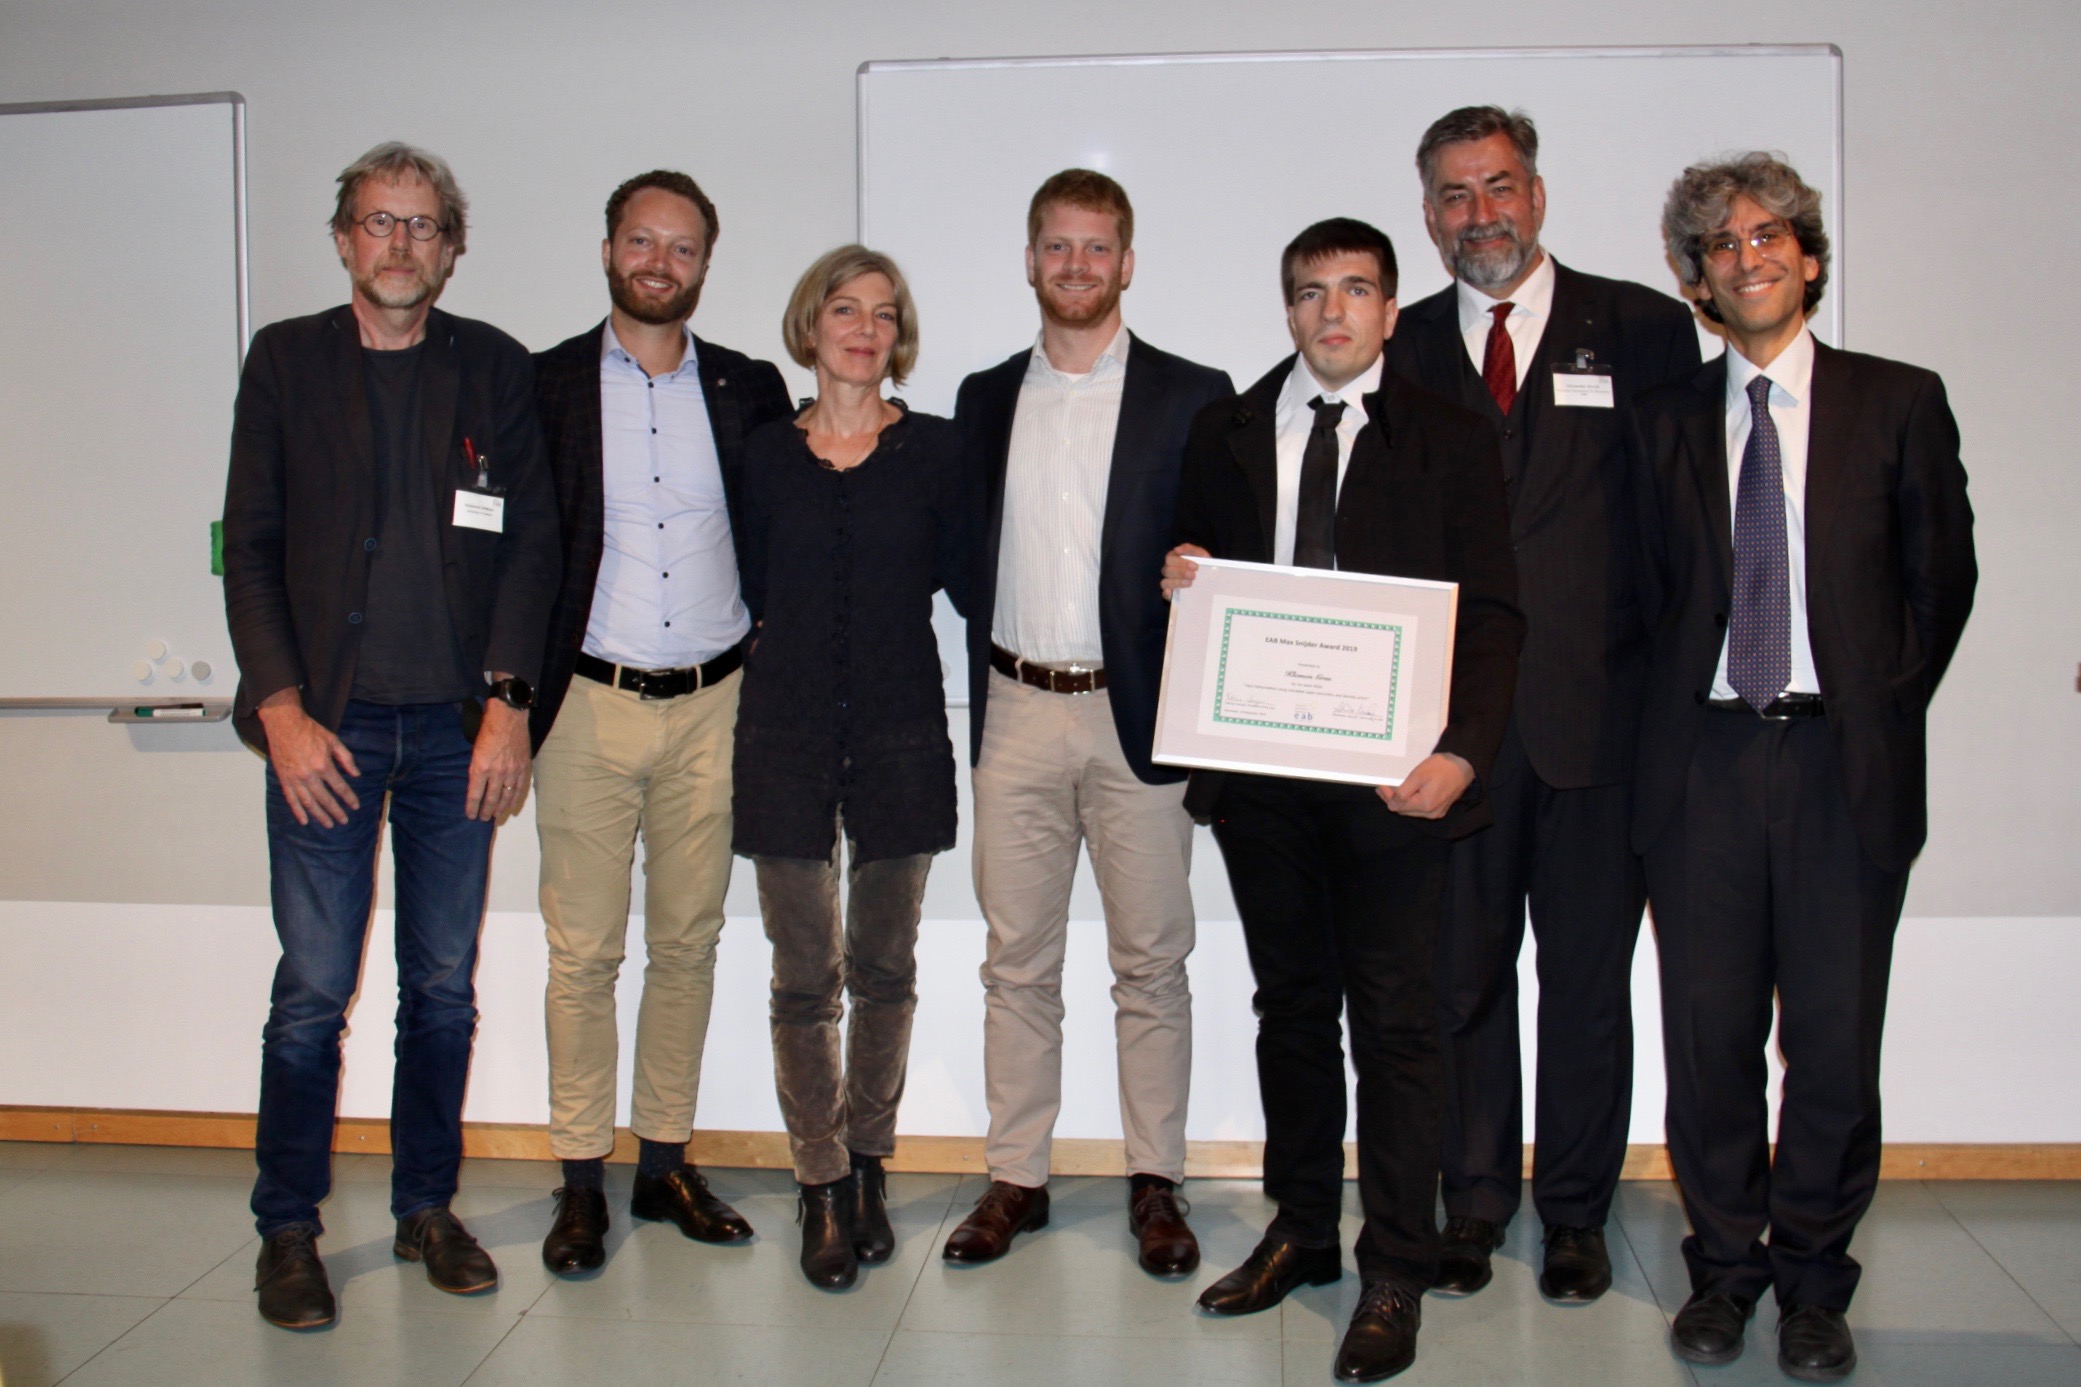 [Photo] Jury member Prof Raymond Veldhuis, Arthur Snijder, Carine Wouters, Caspar Snijder, the award winner Dr Klemen Grm together with the EAB chairman Alexander Nouak and the EAB award chair Prof Patrizio Campisi